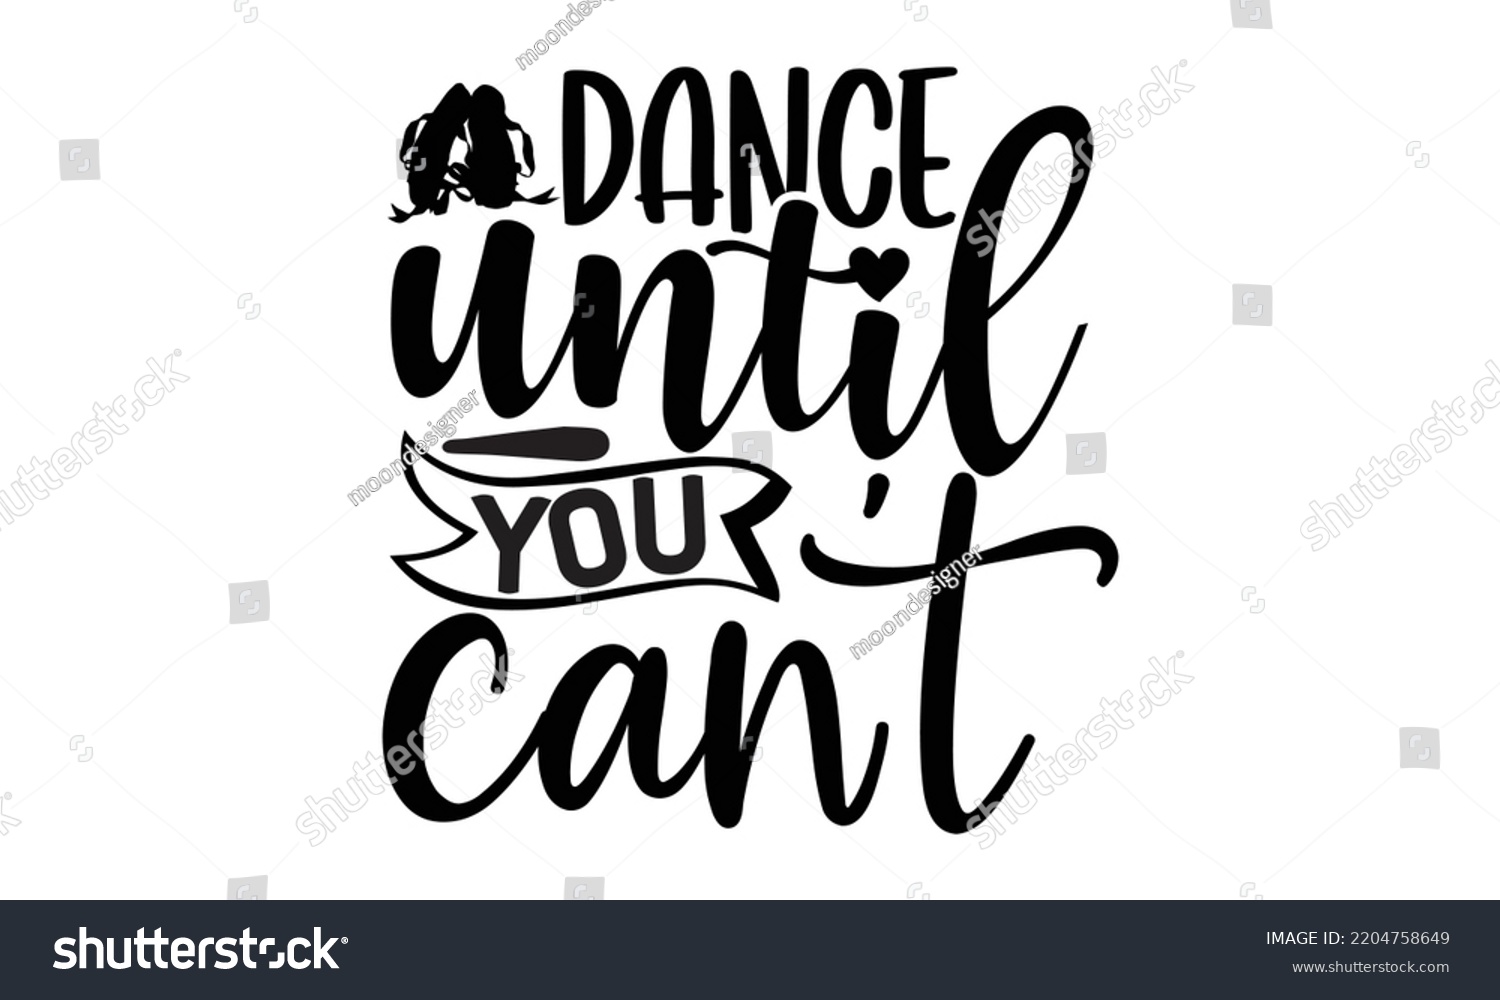 SVG of dance until you can't - Ballet svg t shirt design, ballet SVG Cut Files, Girl Ballet Design, Hand drawn lettering phrase and vector sign, EPS 10 svg